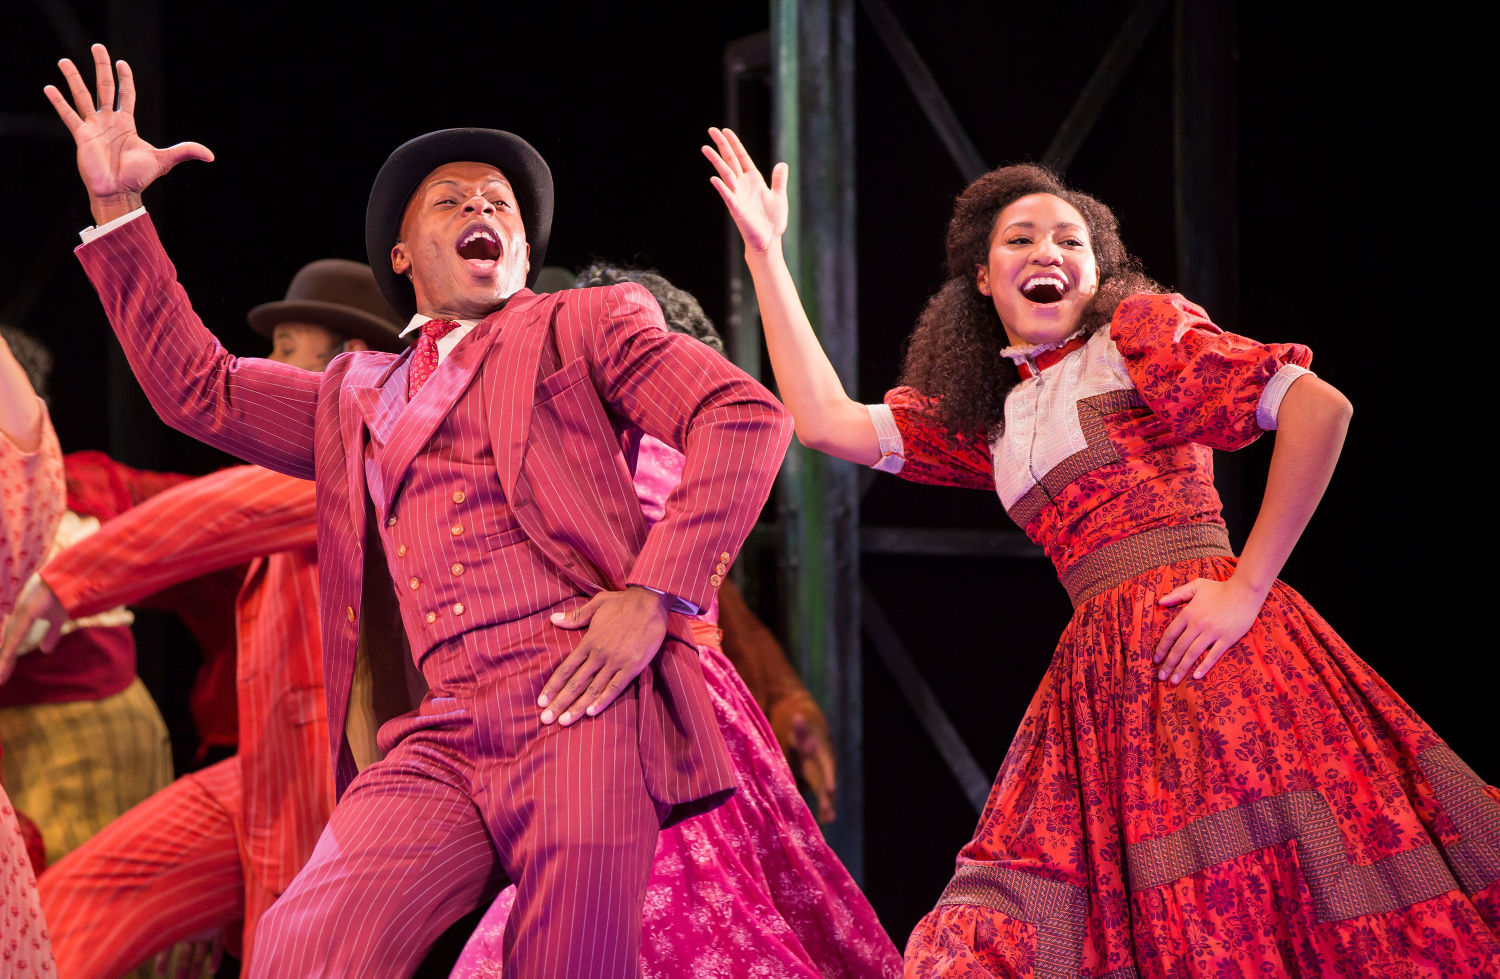 ragtime the musical